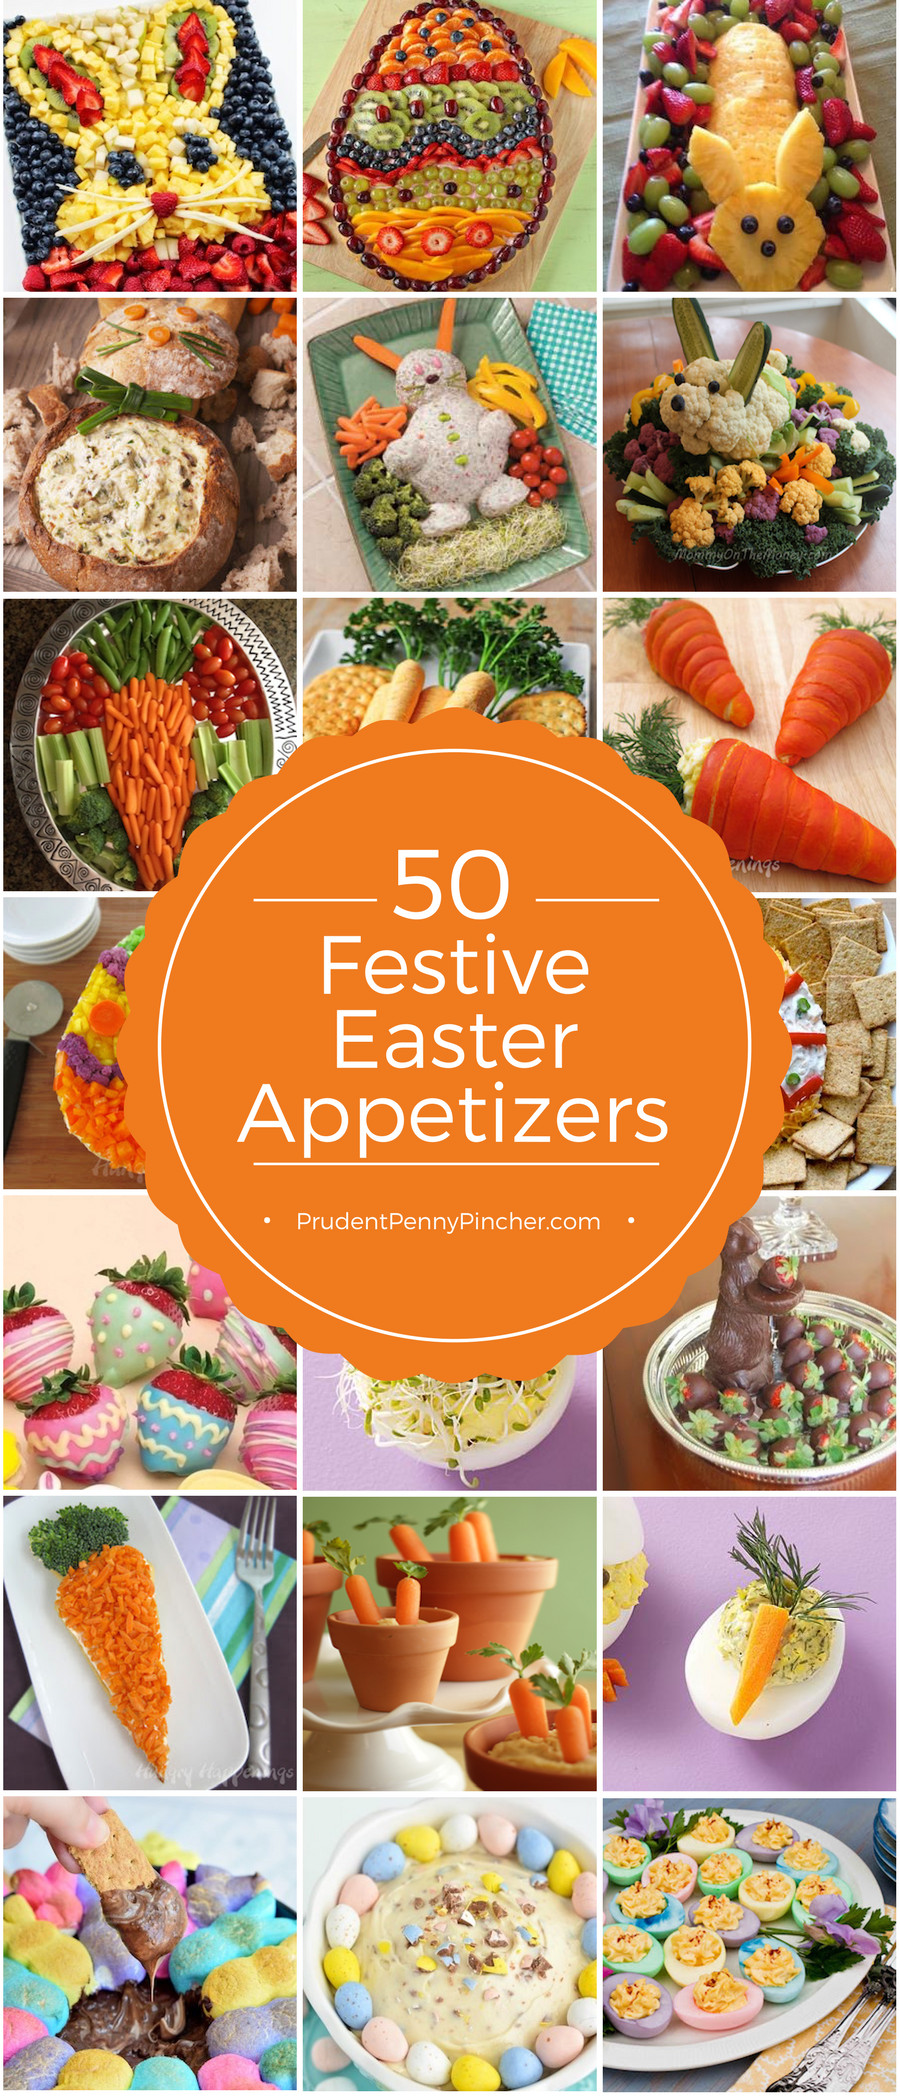 Easter Dinner Appetizers
 50 Festive Easter Appetizers Prudent Penny Pincher